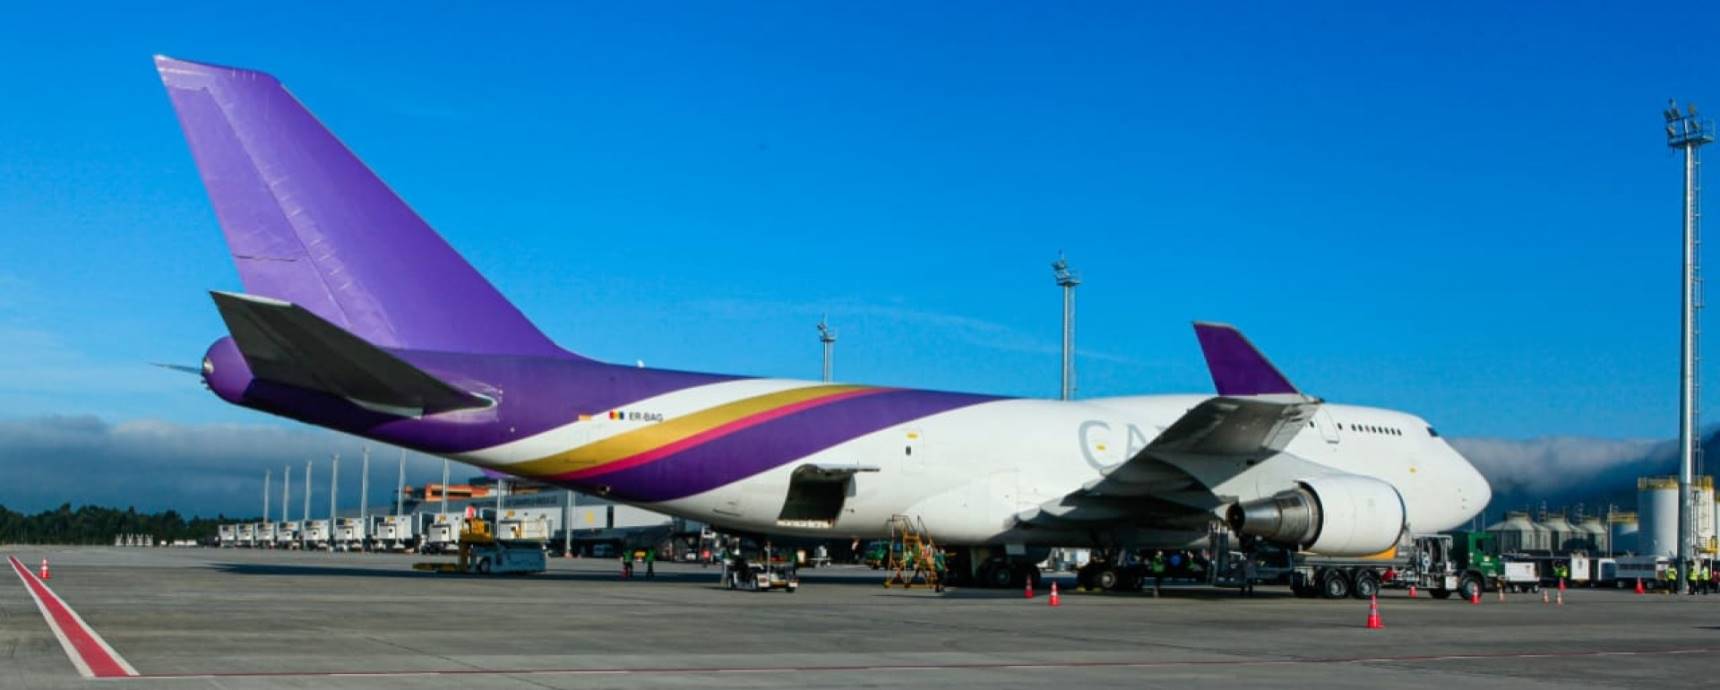 Florianópolis International Airport welcomes a Boeing 747-400F cargo plane for the first time in its history